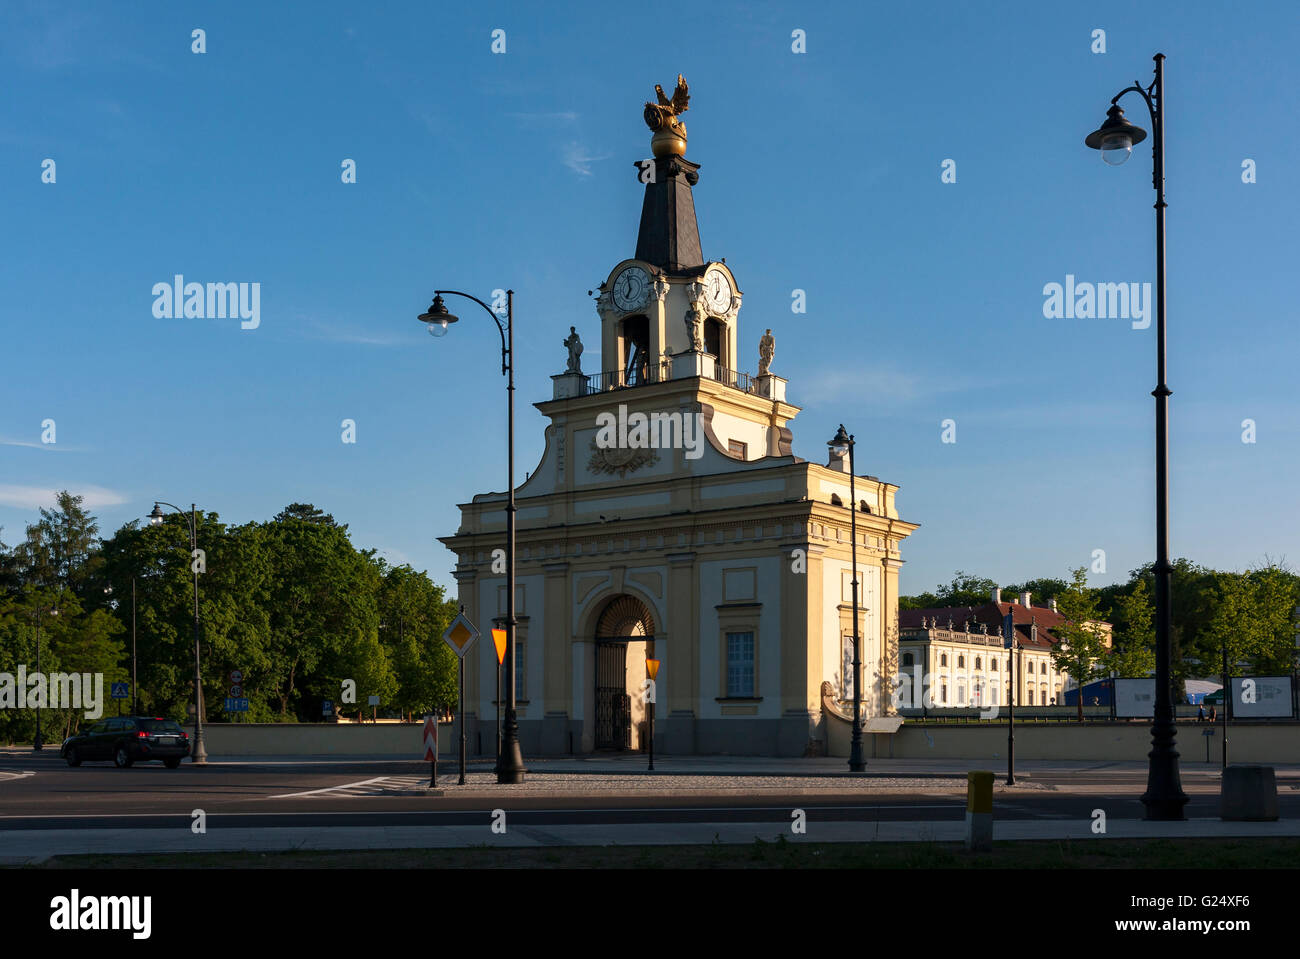 Architecture. Gate of the Branicki Palace in Bialystok, Poland. Stock Photo